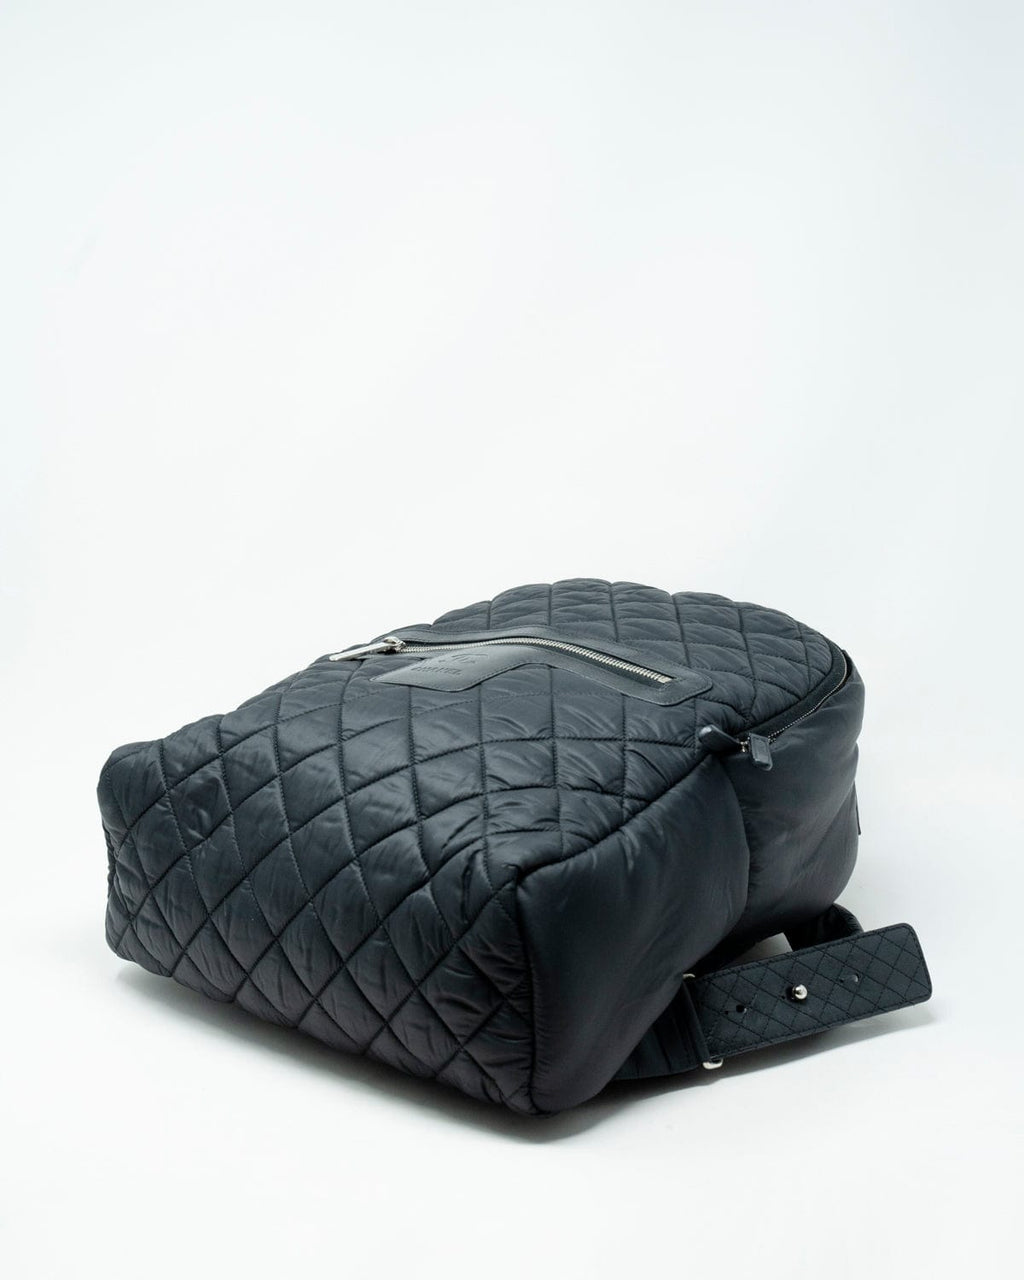 CHANEL COCO COCOON BACKPACK IN BLACK QUILTED CANVAS NYLON BLACK BACKPACK BAG